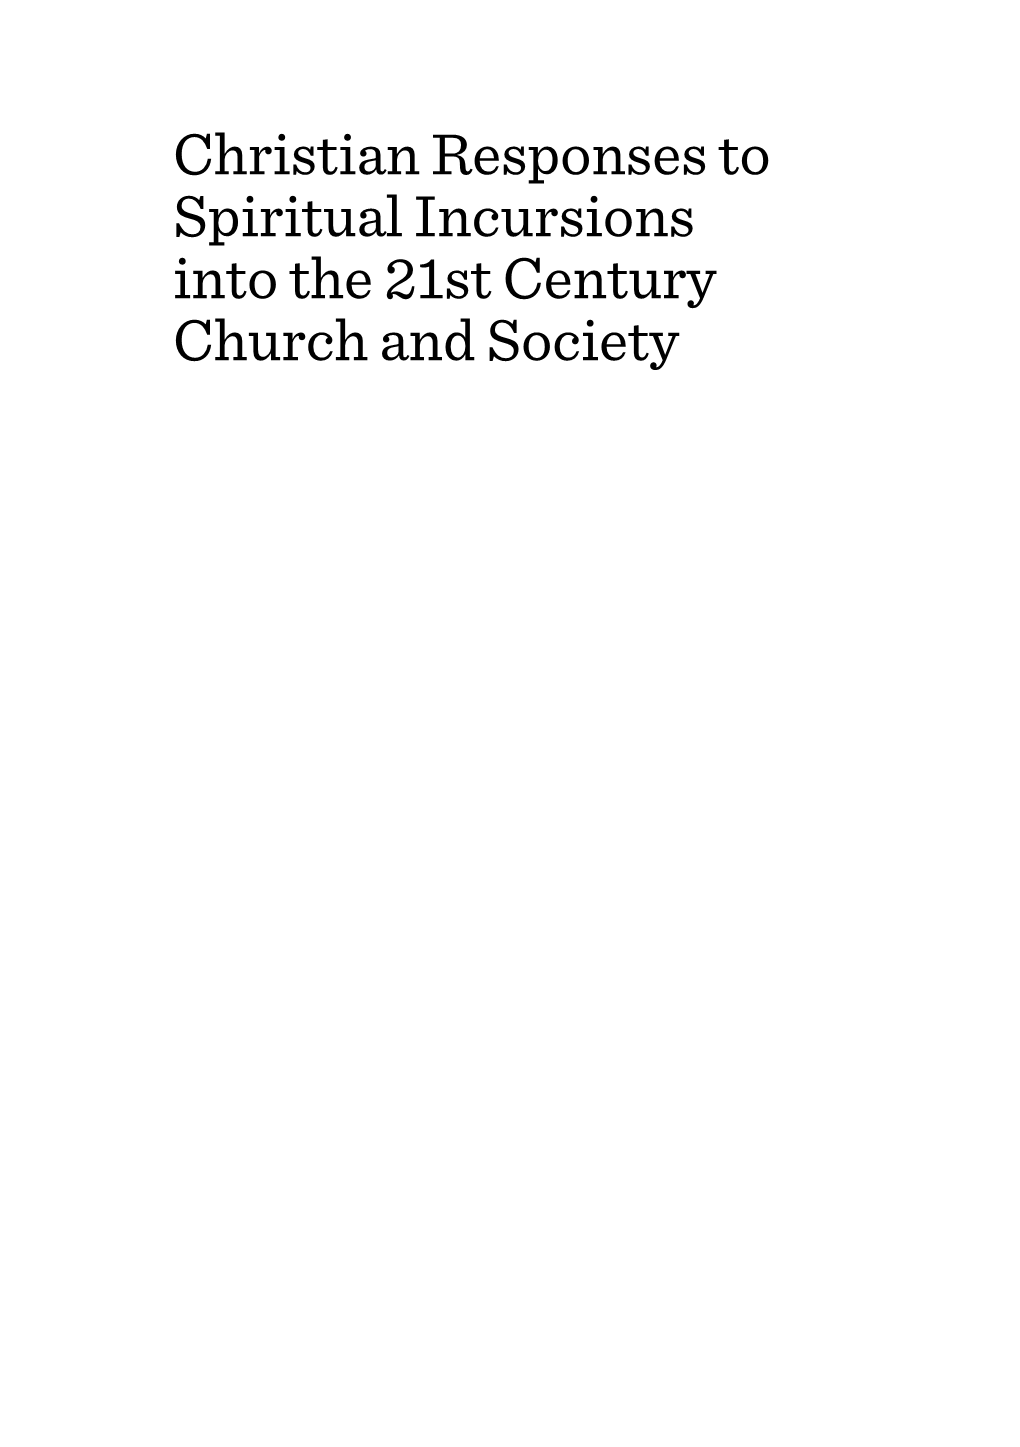 Christian Responses to Spiritual Incursions Into the 21St Century Church and Society